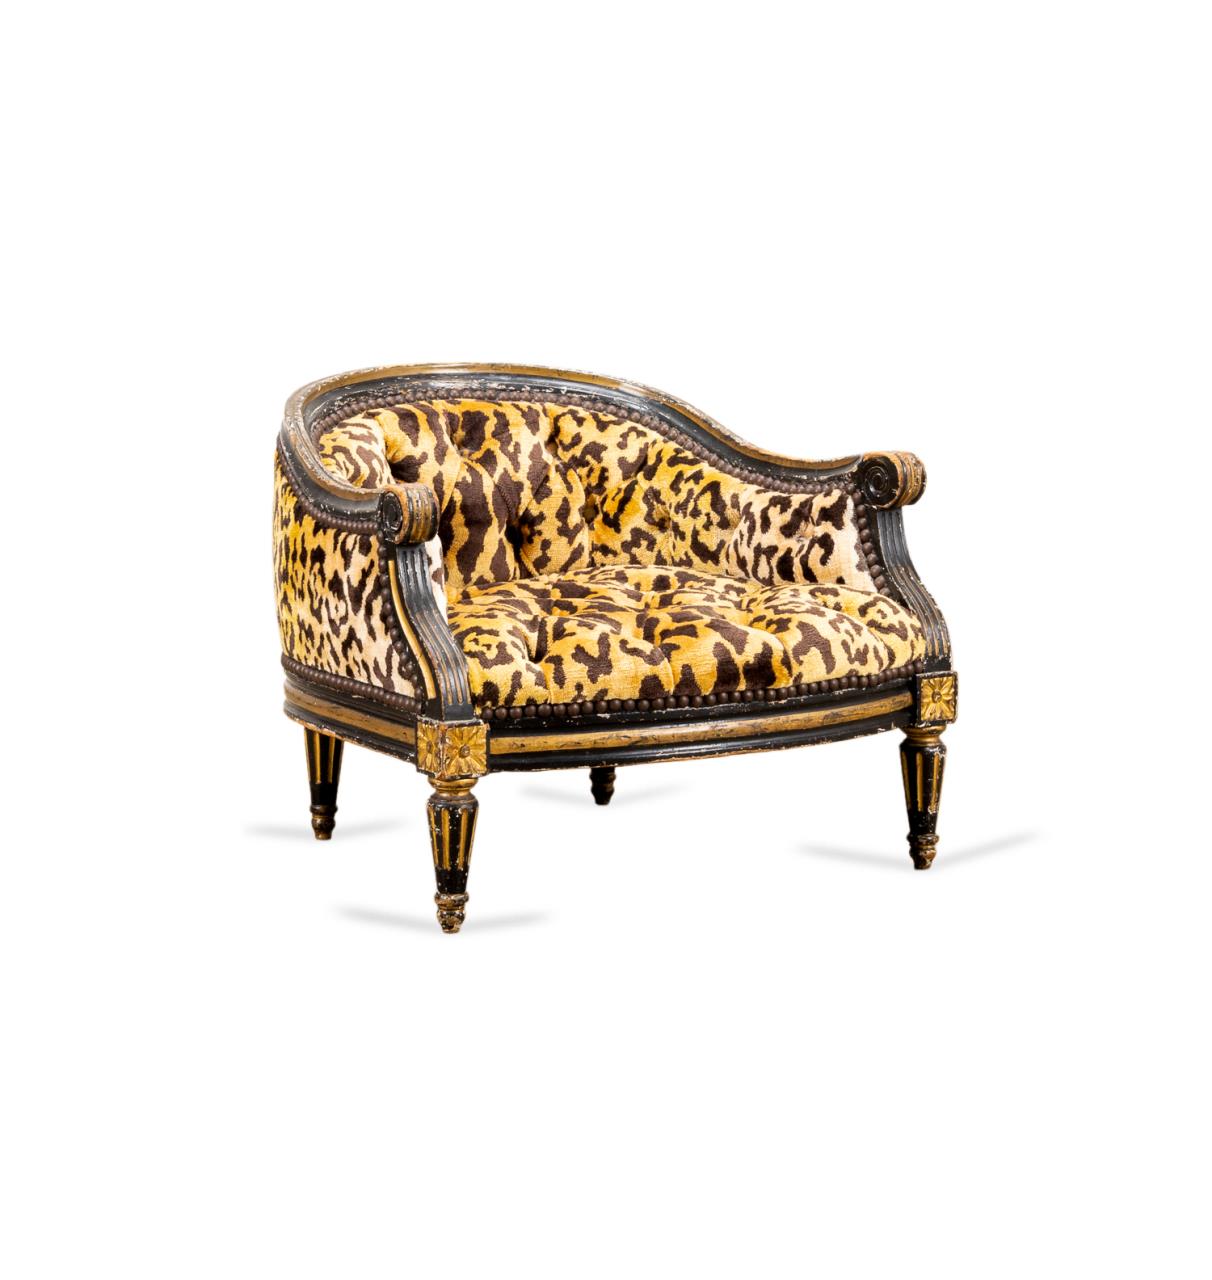 LOUIS XVI STYLE BERGERE FORM FOOTSTOOL